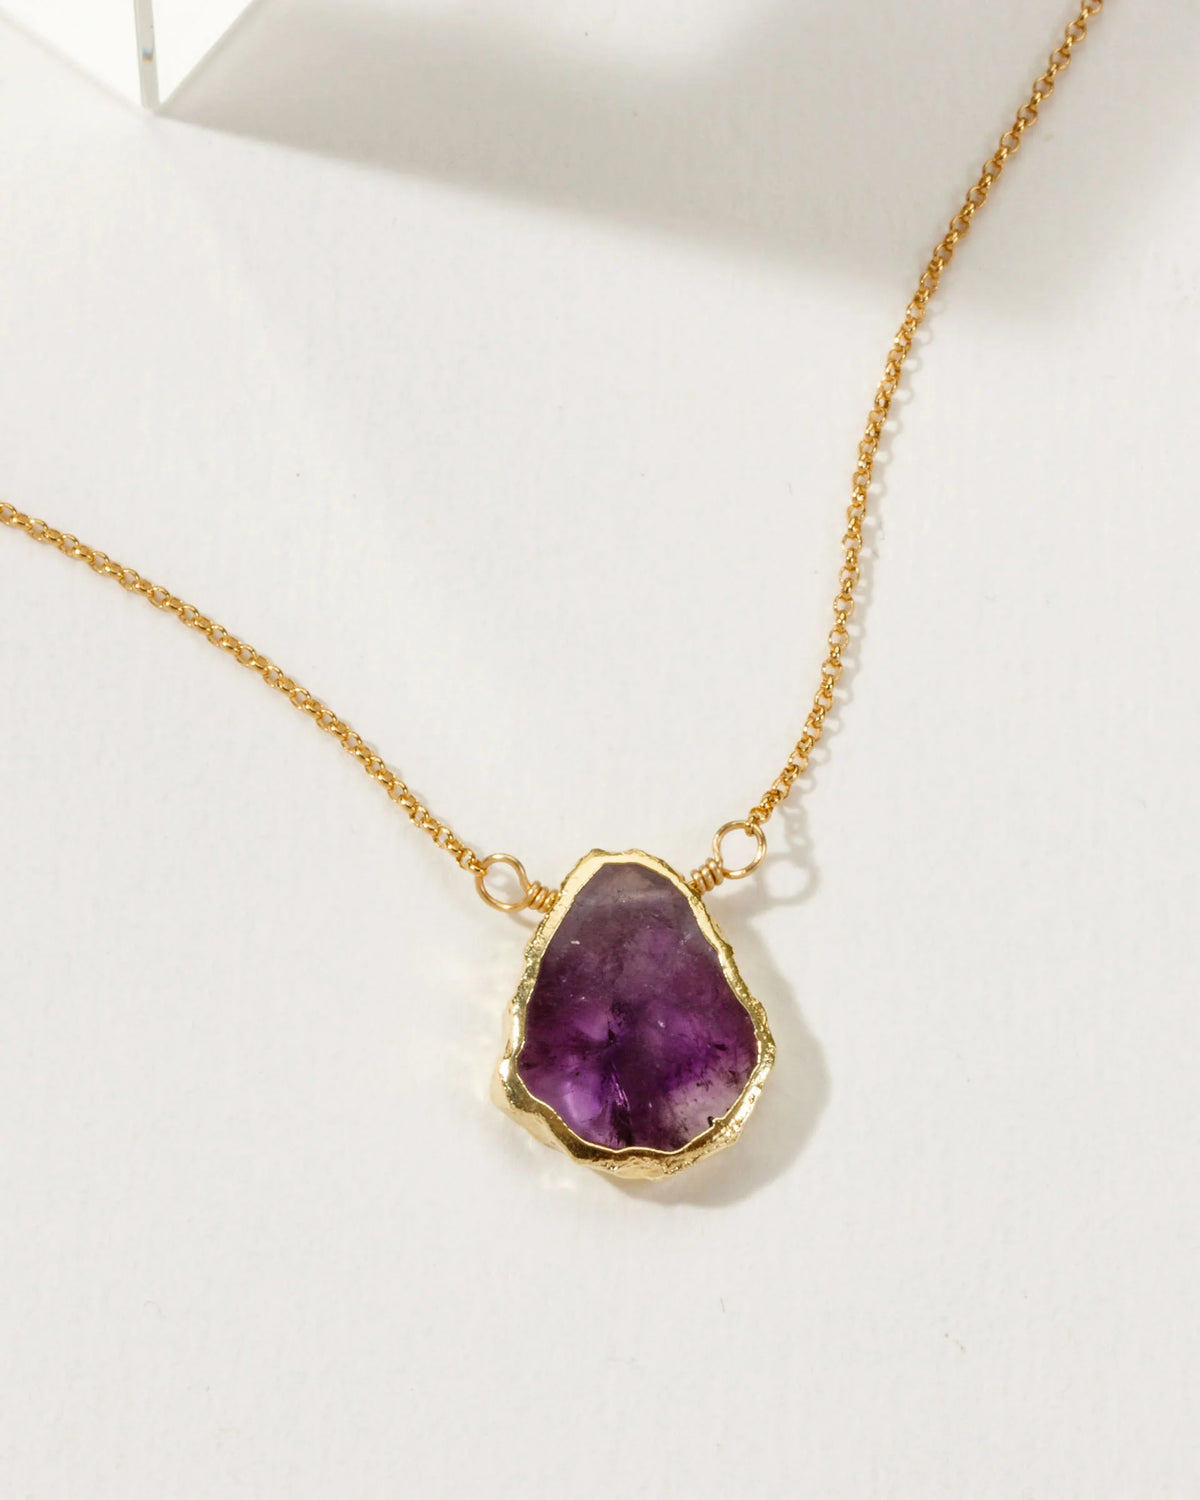 earth wind and fire necklace in 14kt gold plated brass and amethyst by luna norte jewelry